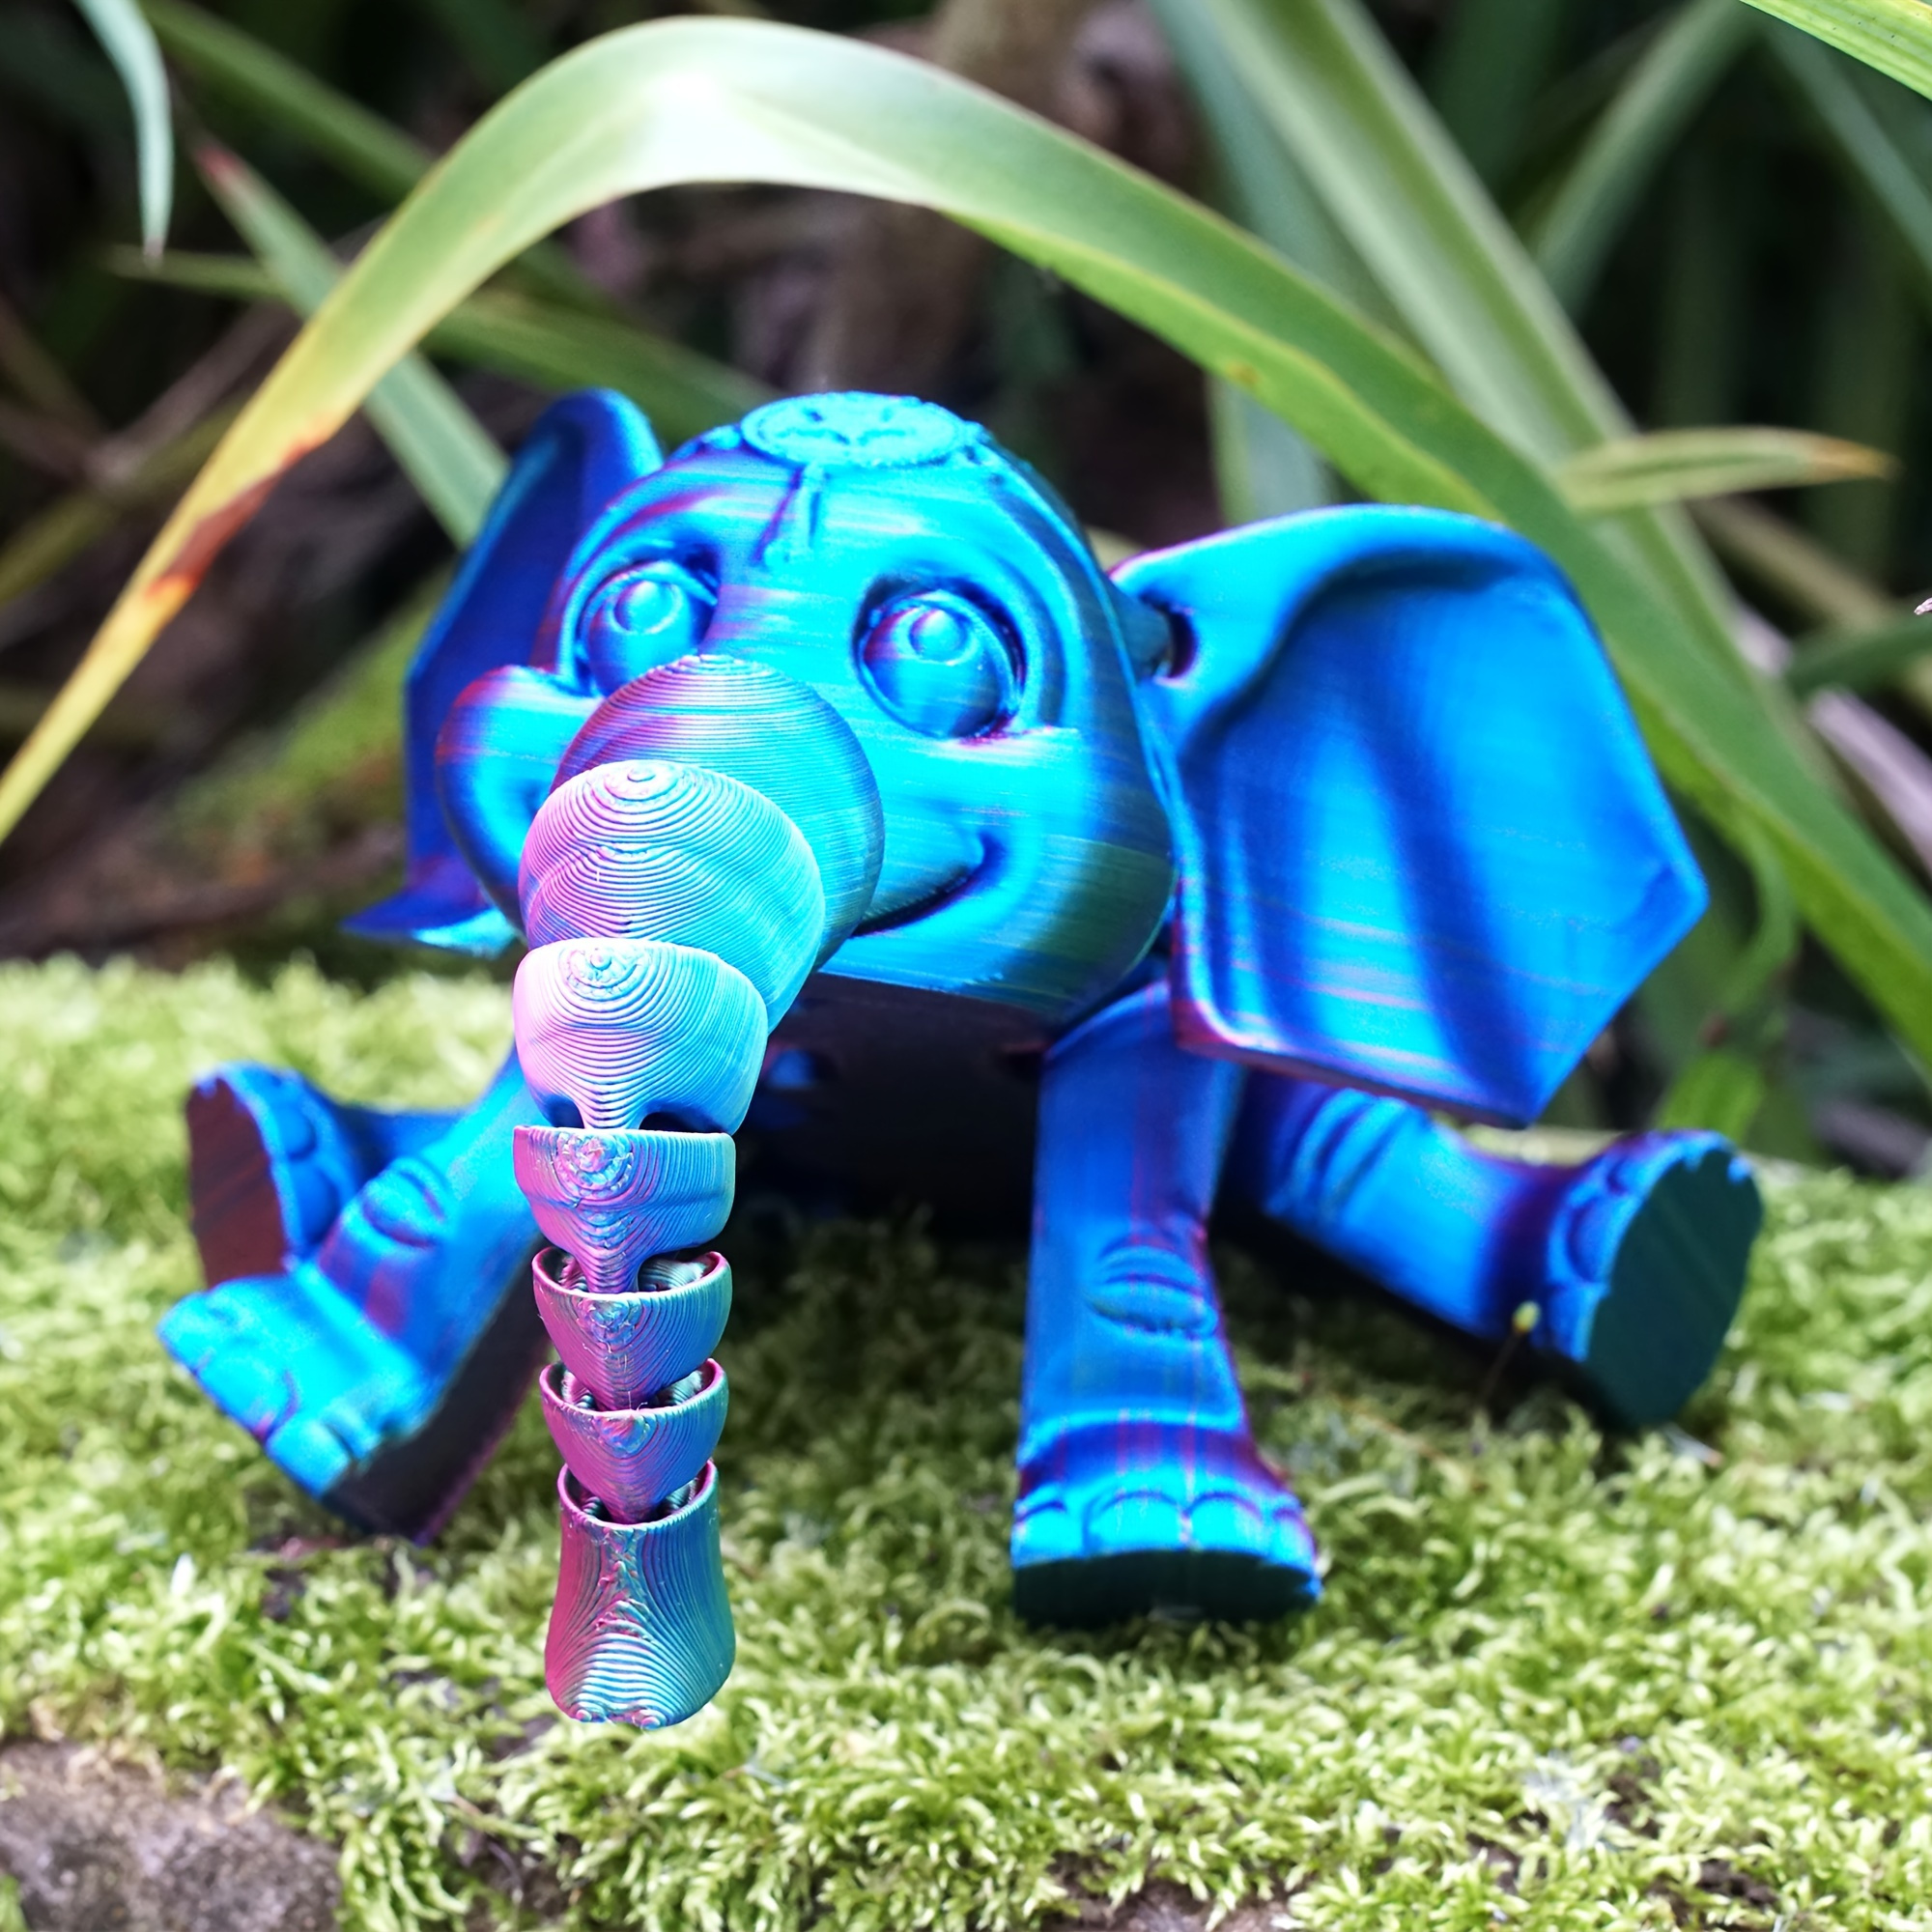 

1pc Plastic Articulated Elephant Toy - 3d Printed, Detailed, No Batteries Needed - Charming Anime-inspired Desktop Decoration With Moving Joints